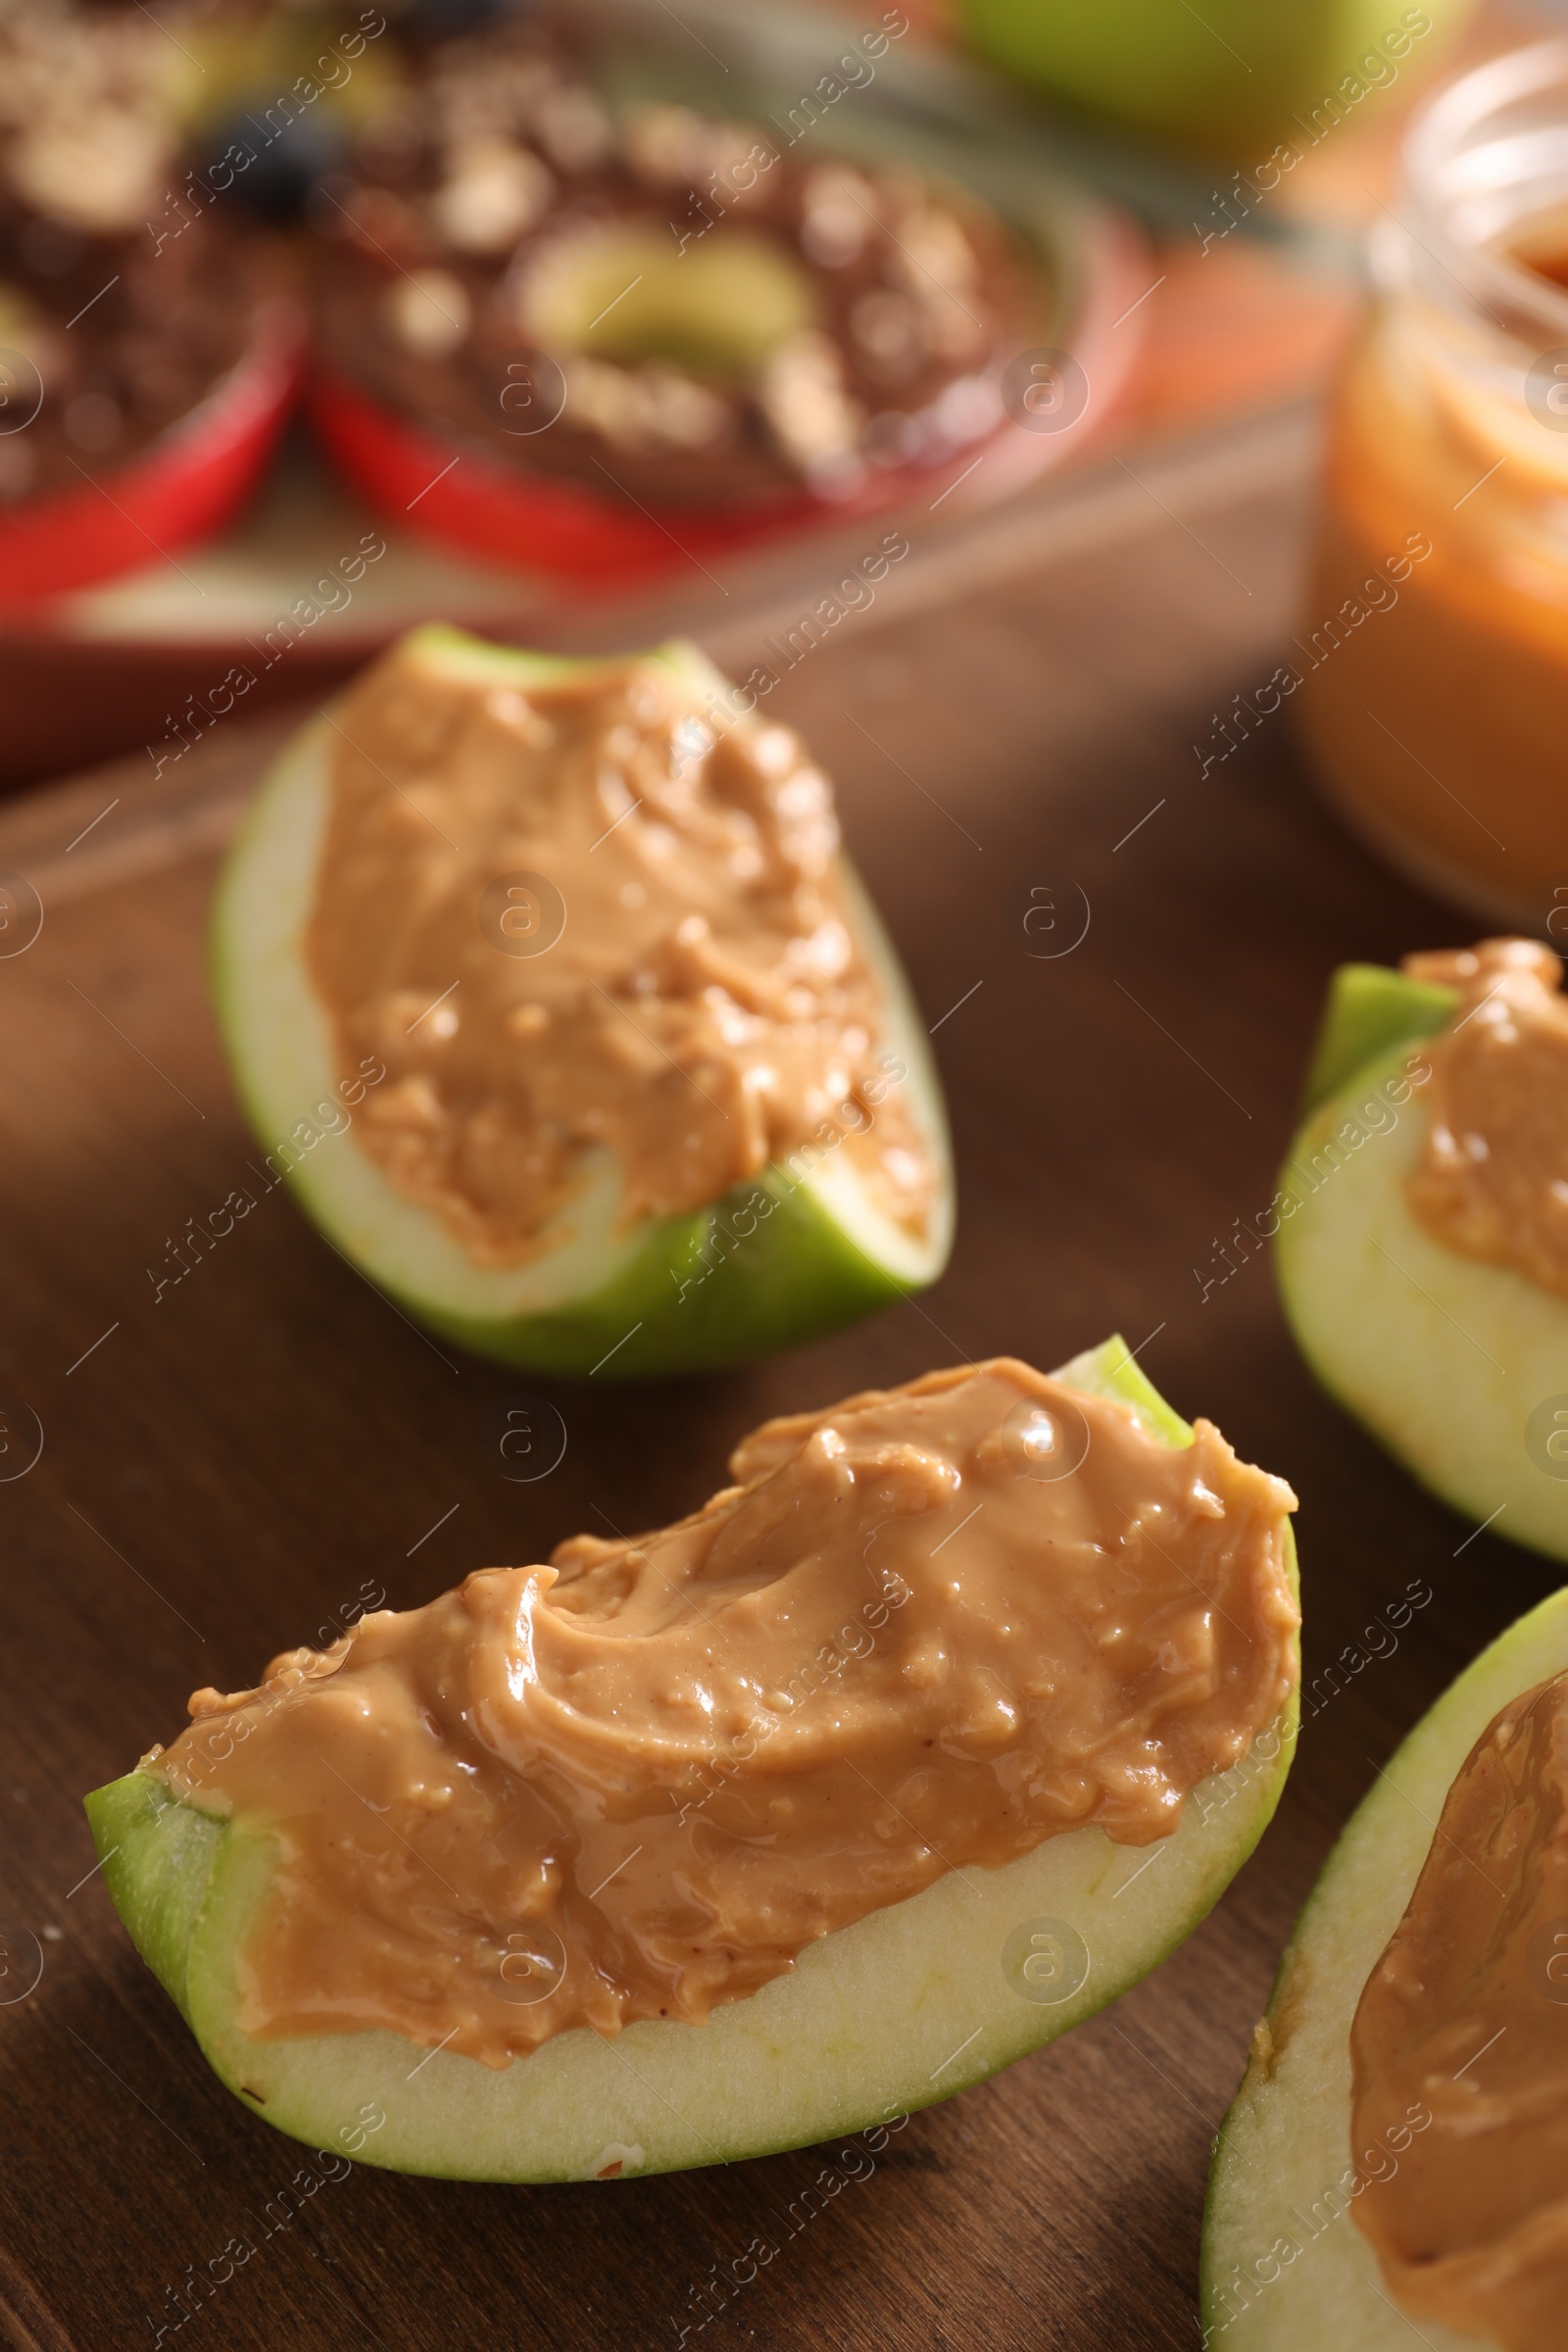 Photo of Slices of fresh apple with nut butter on wooden board, closeup